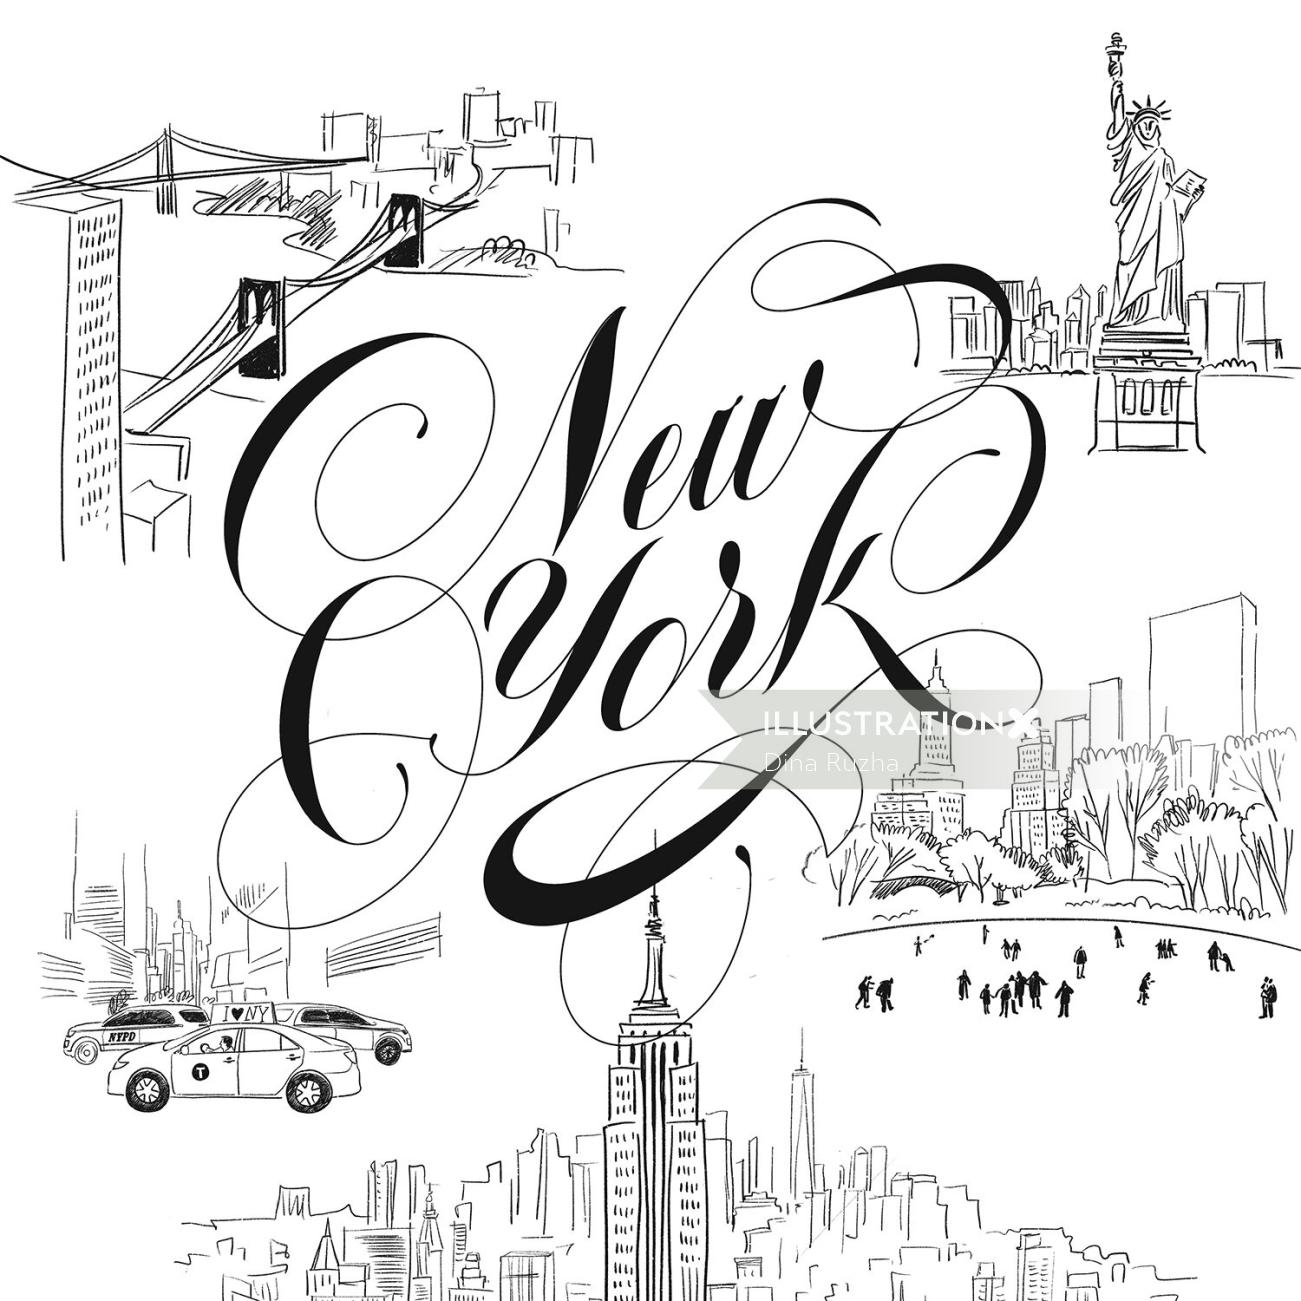 Lettering and graphic for the postcard from NYC.